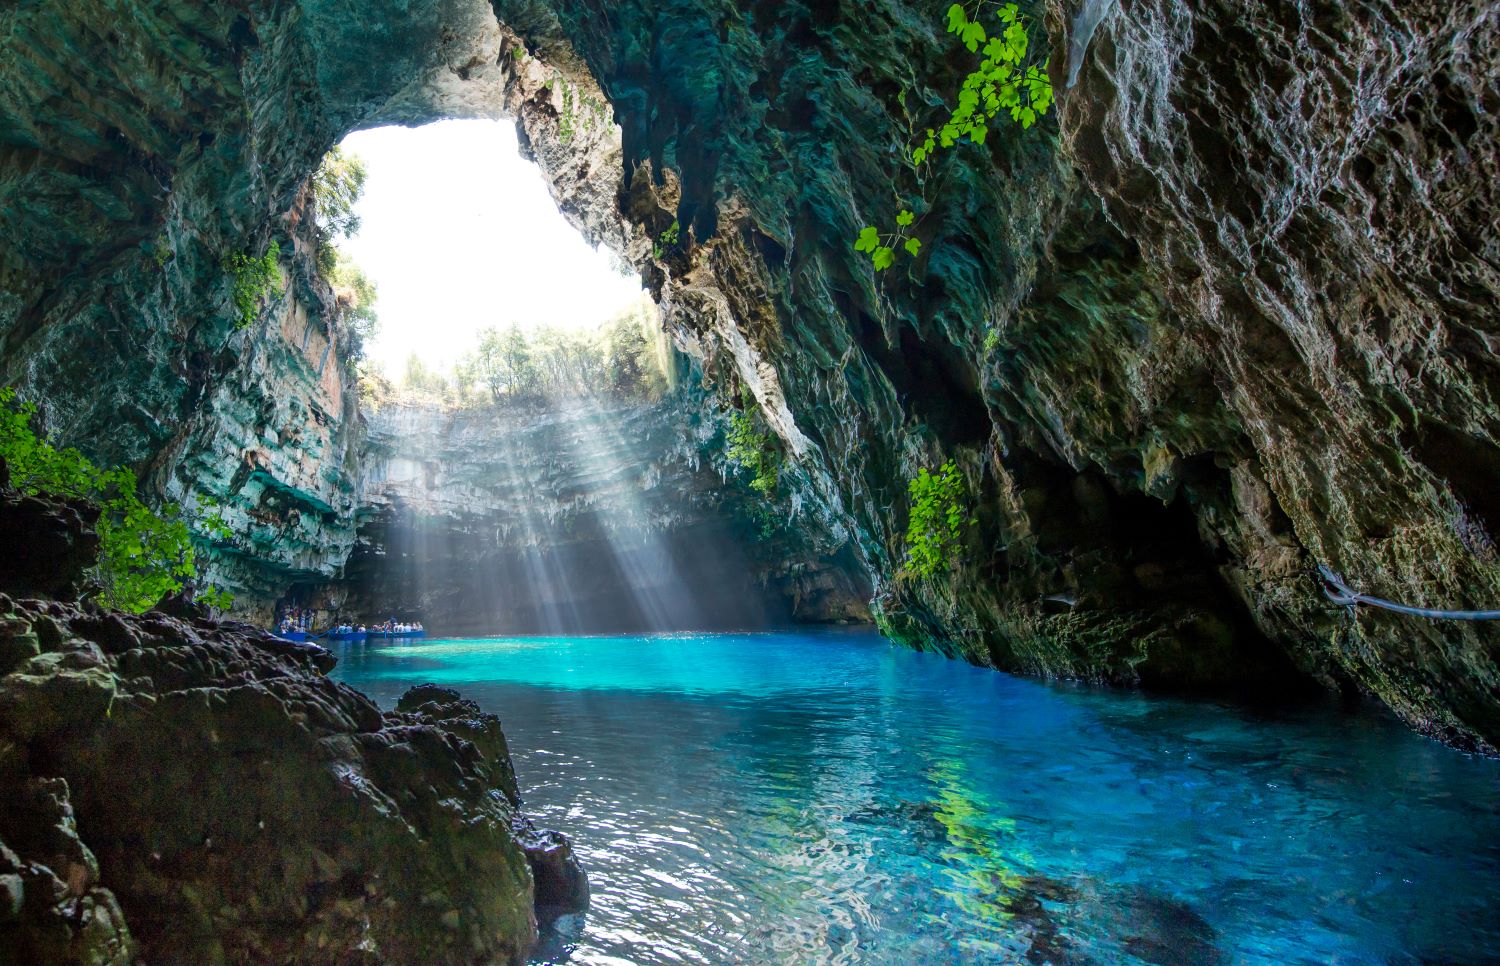 10 of the most beautiful caves in Europe